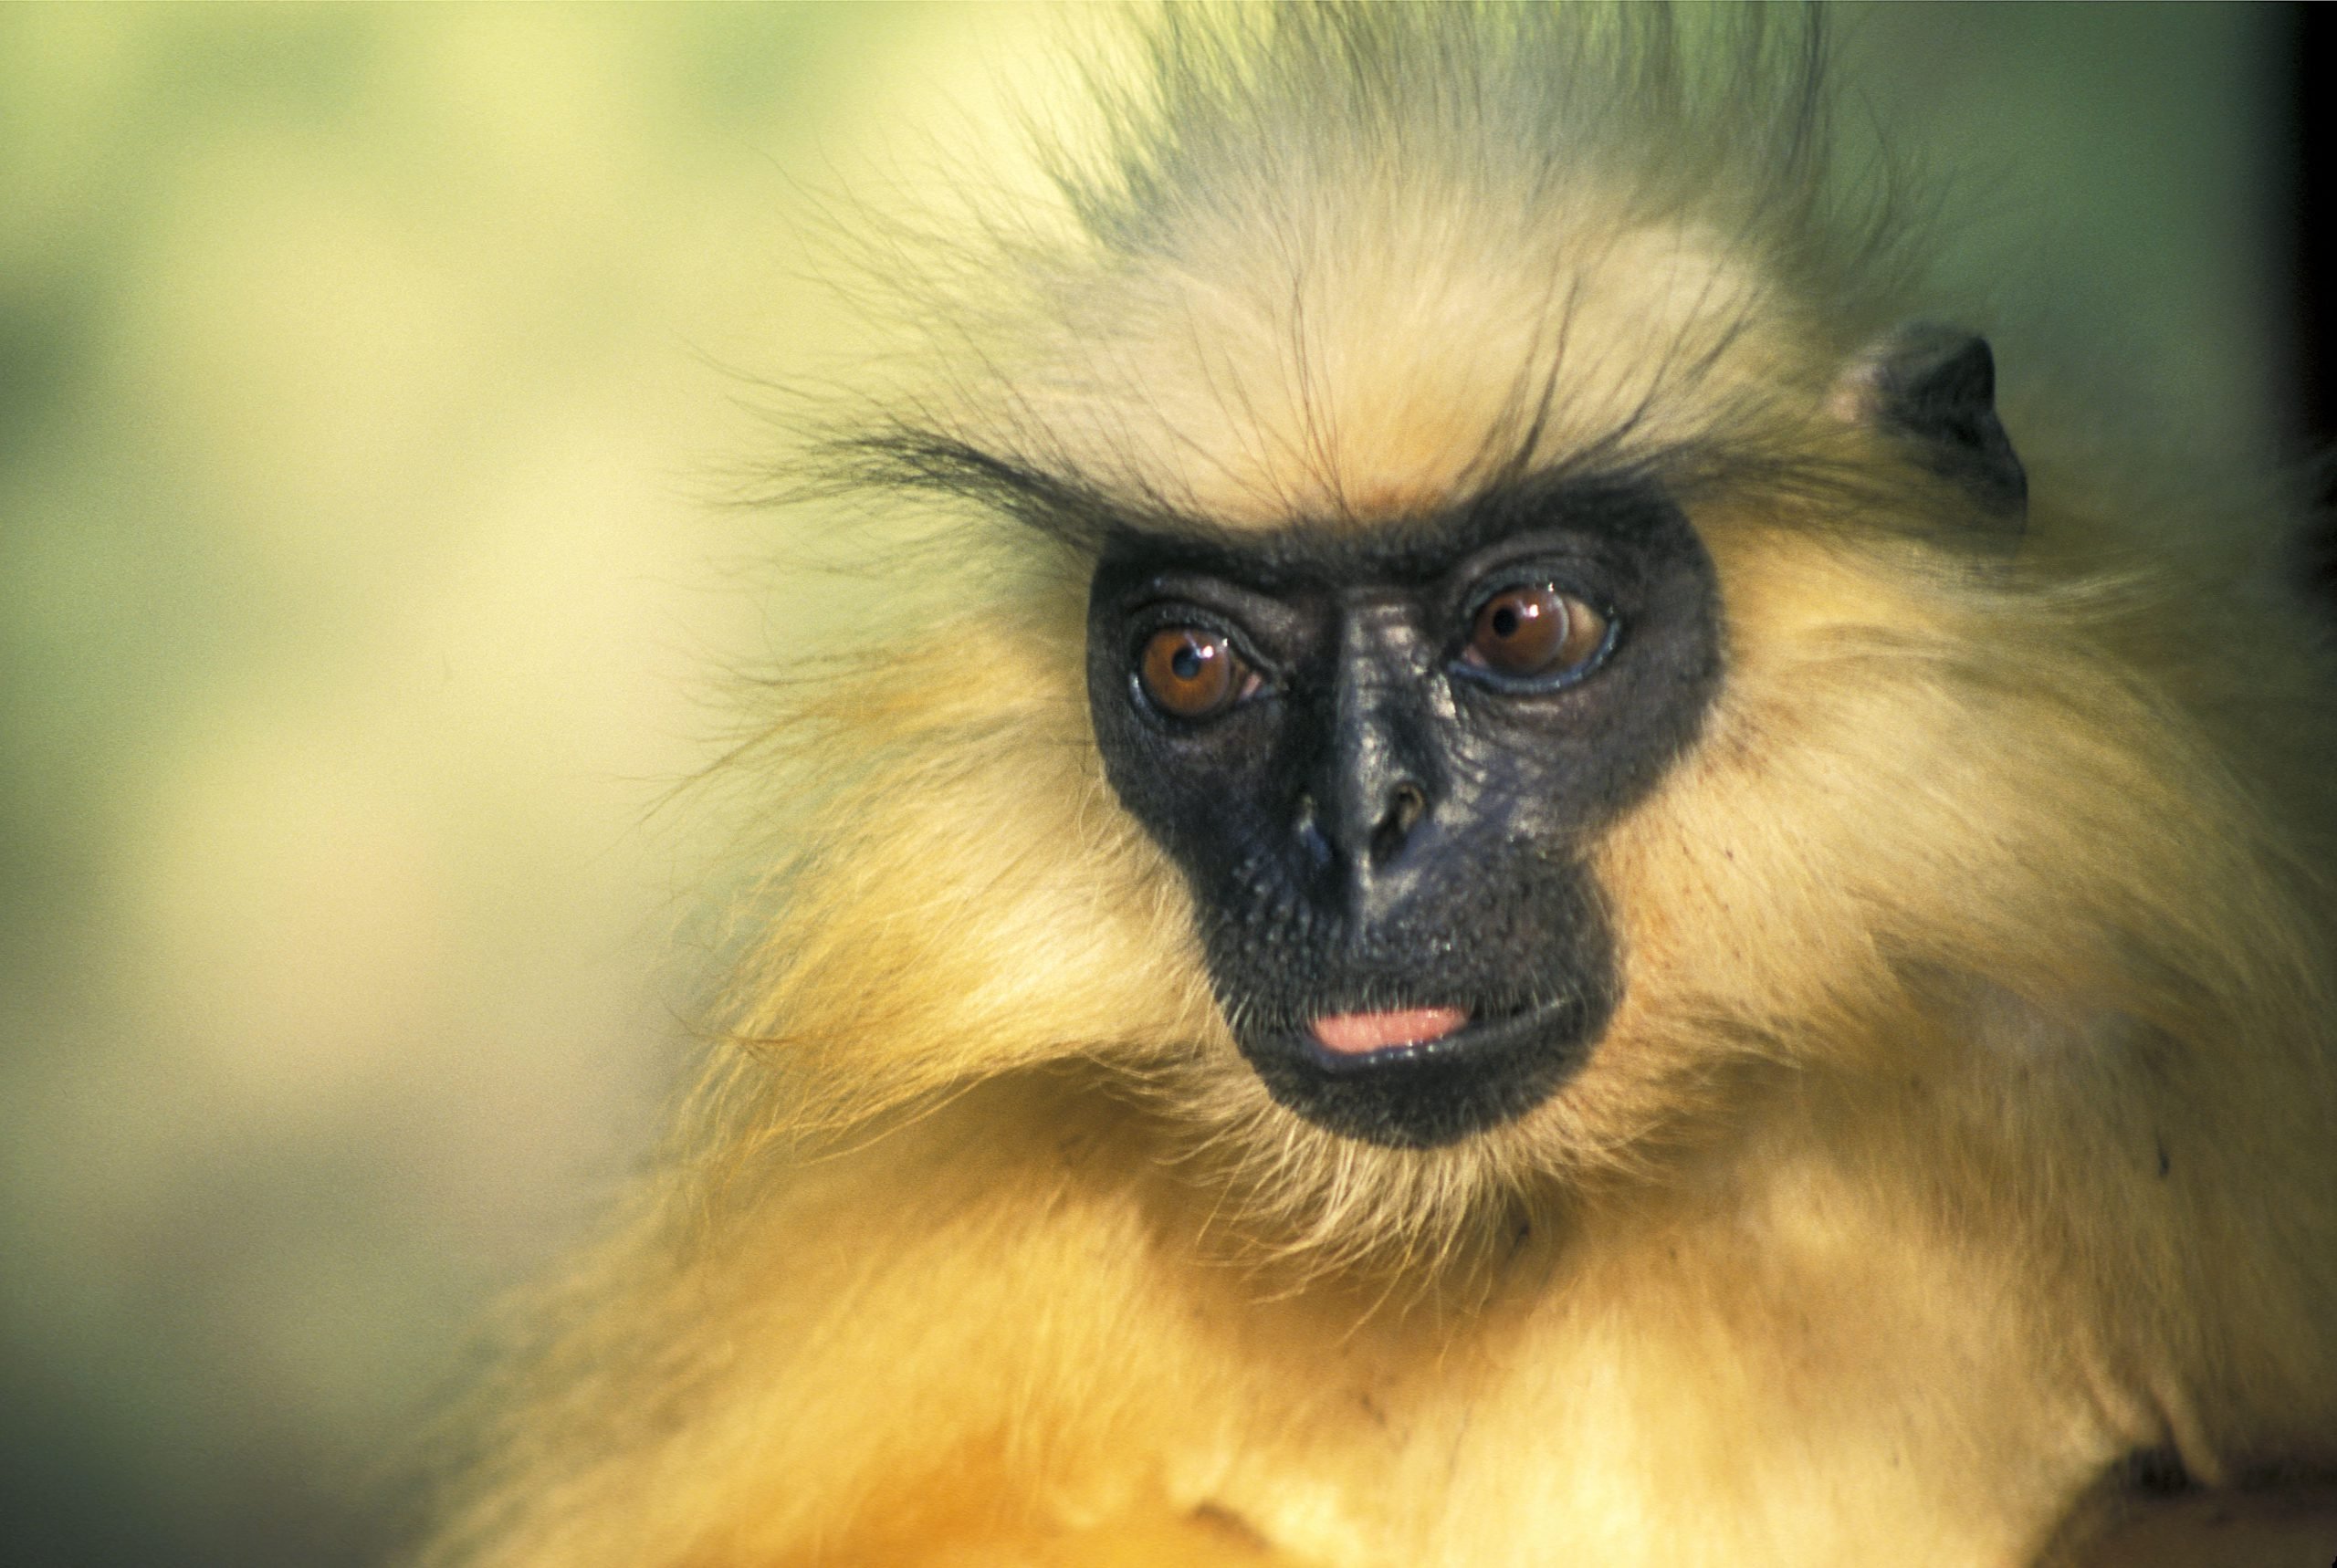 <p>The golden langur is one of the world’s most endangered primates and is only found in Bhutan and Assam in north-east India [image by: Neeraj Mishra/Alamy]</p>